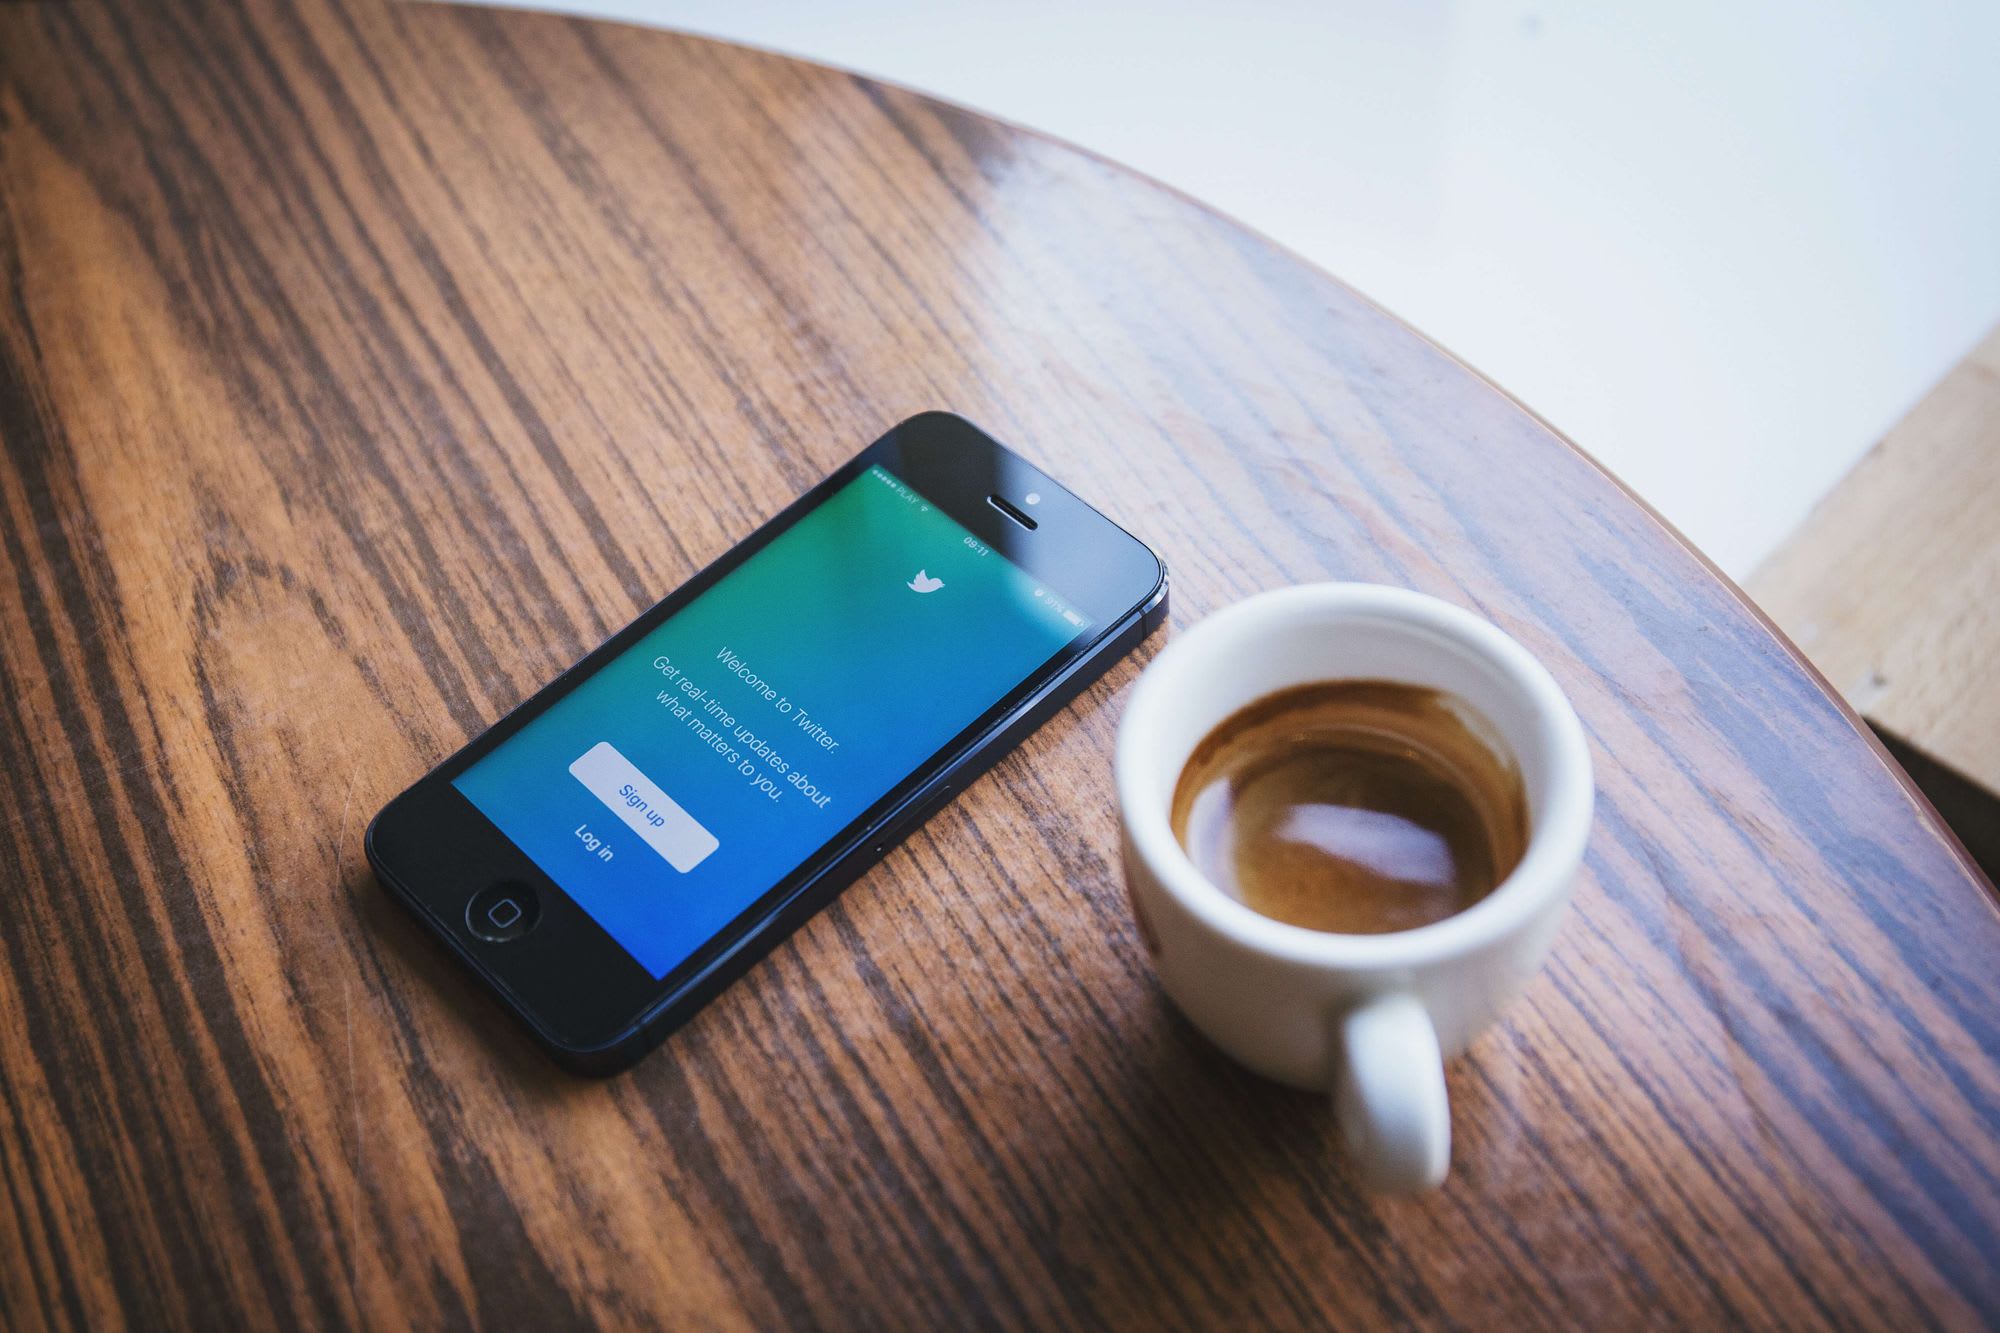 Phone with twitter logo and a coffee